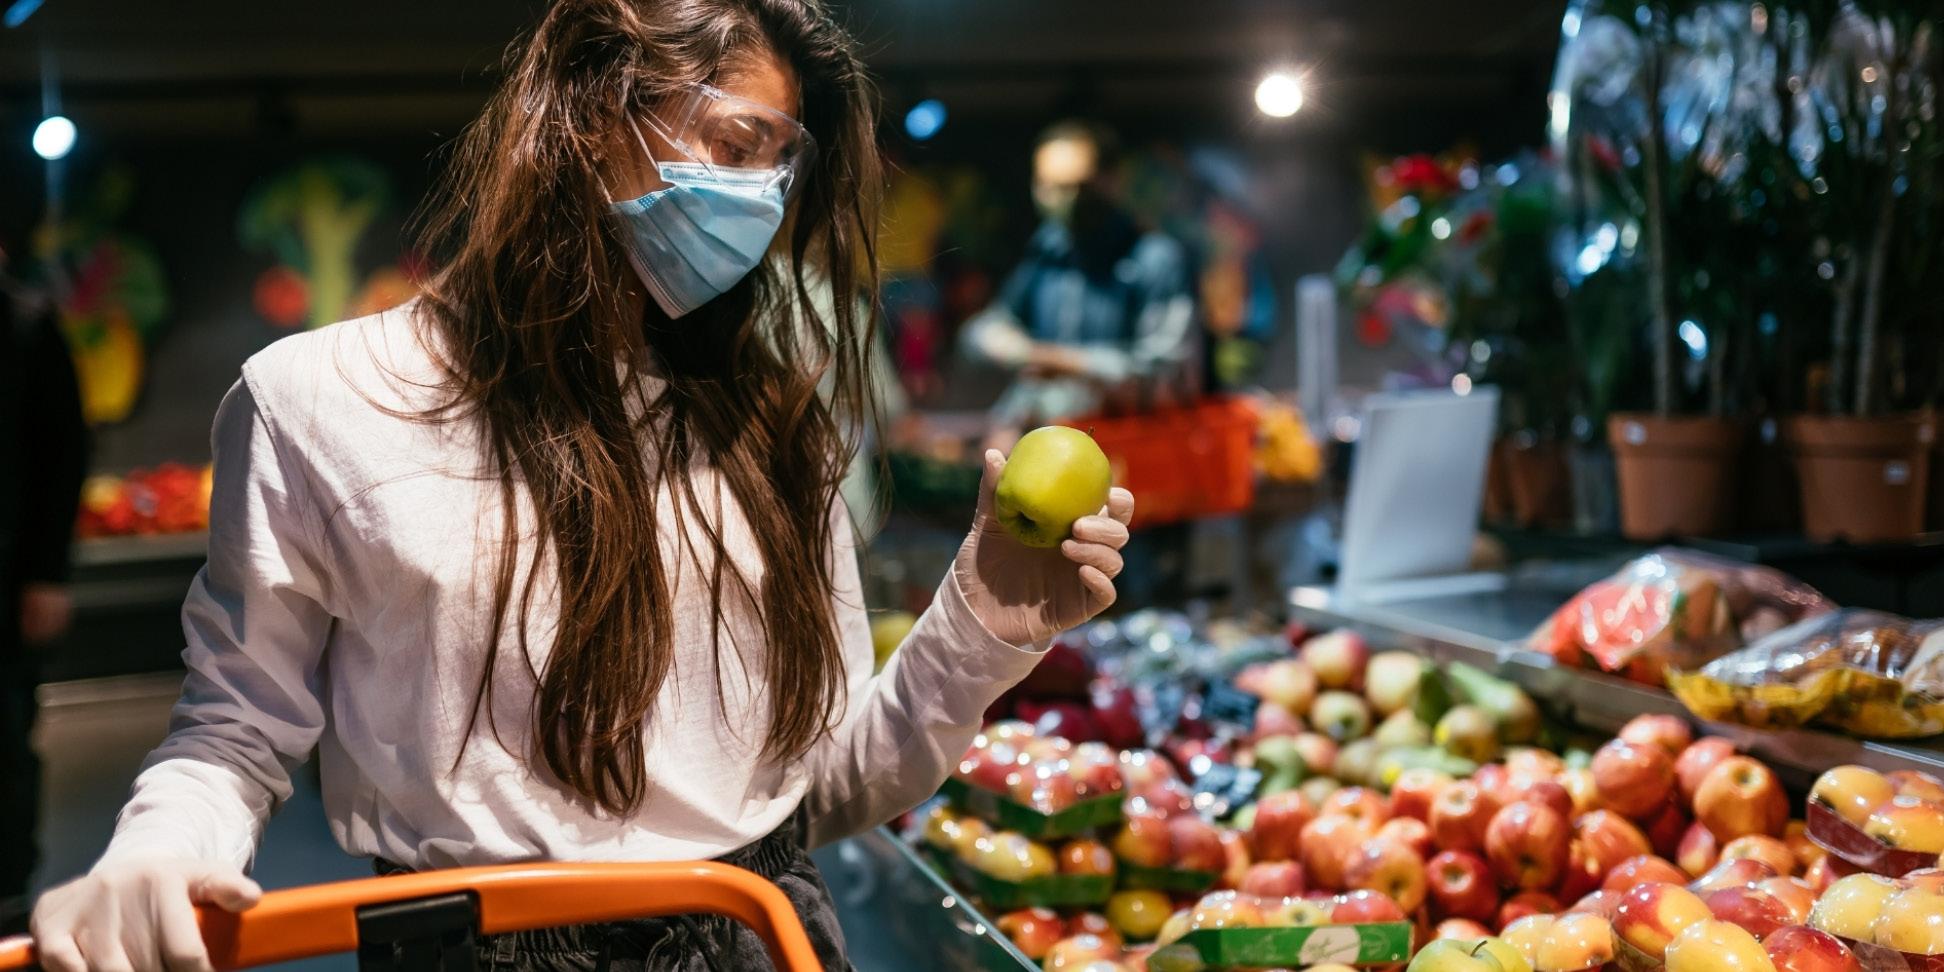 Woman wearing surgical mask while grocery shopping